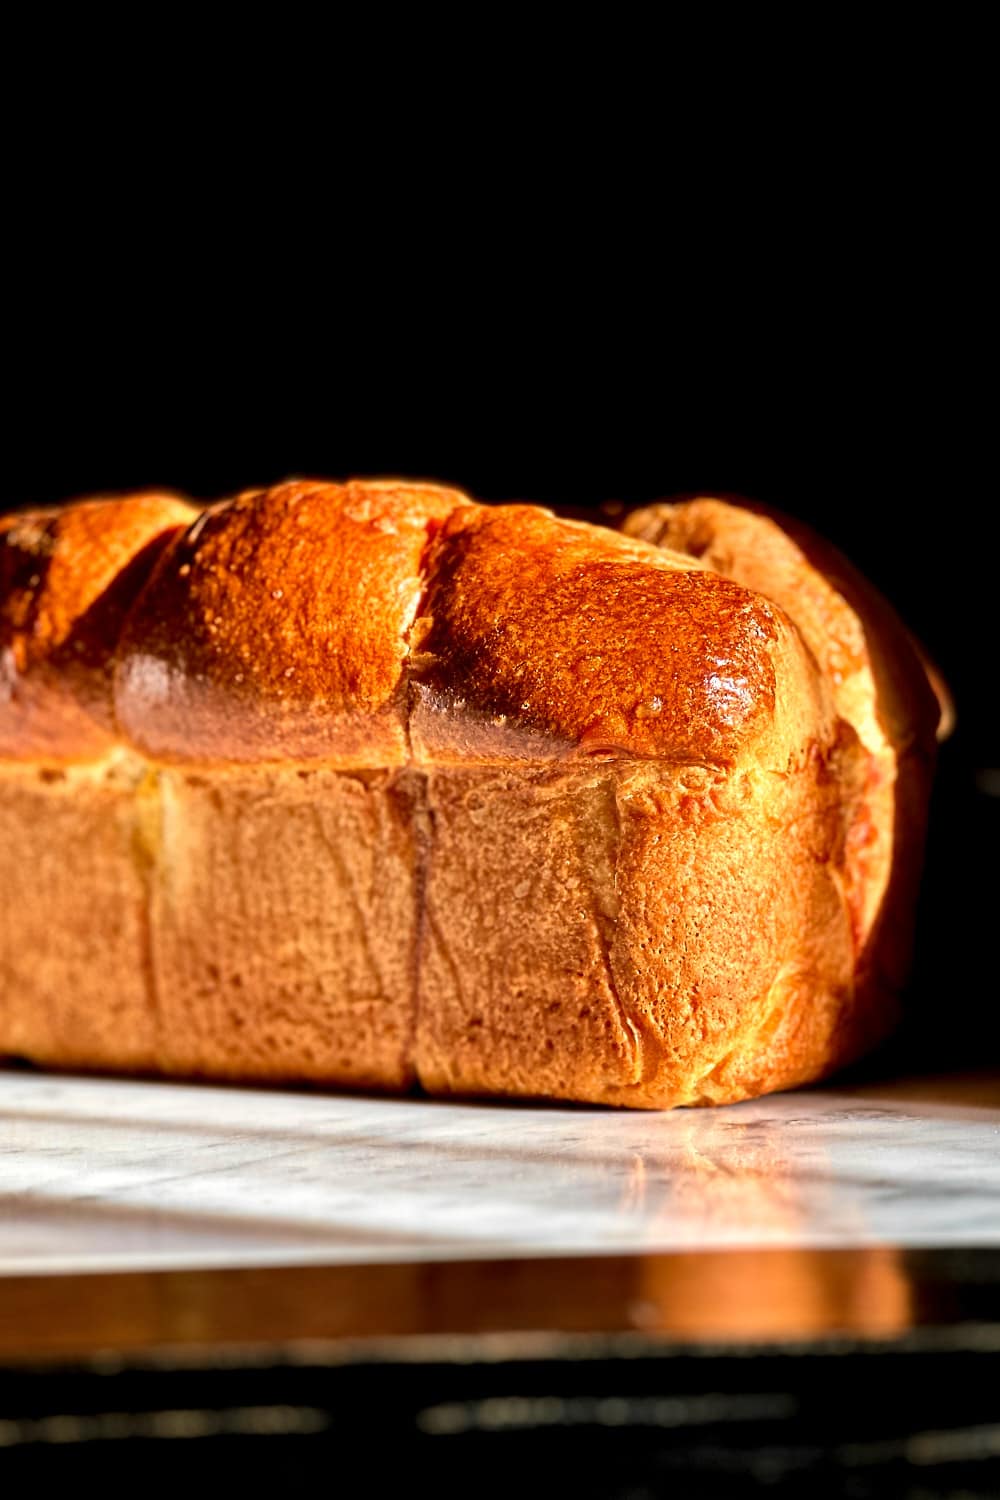 A freshly baked sourdough brioche on a white marble surface in golden hour sunlight.